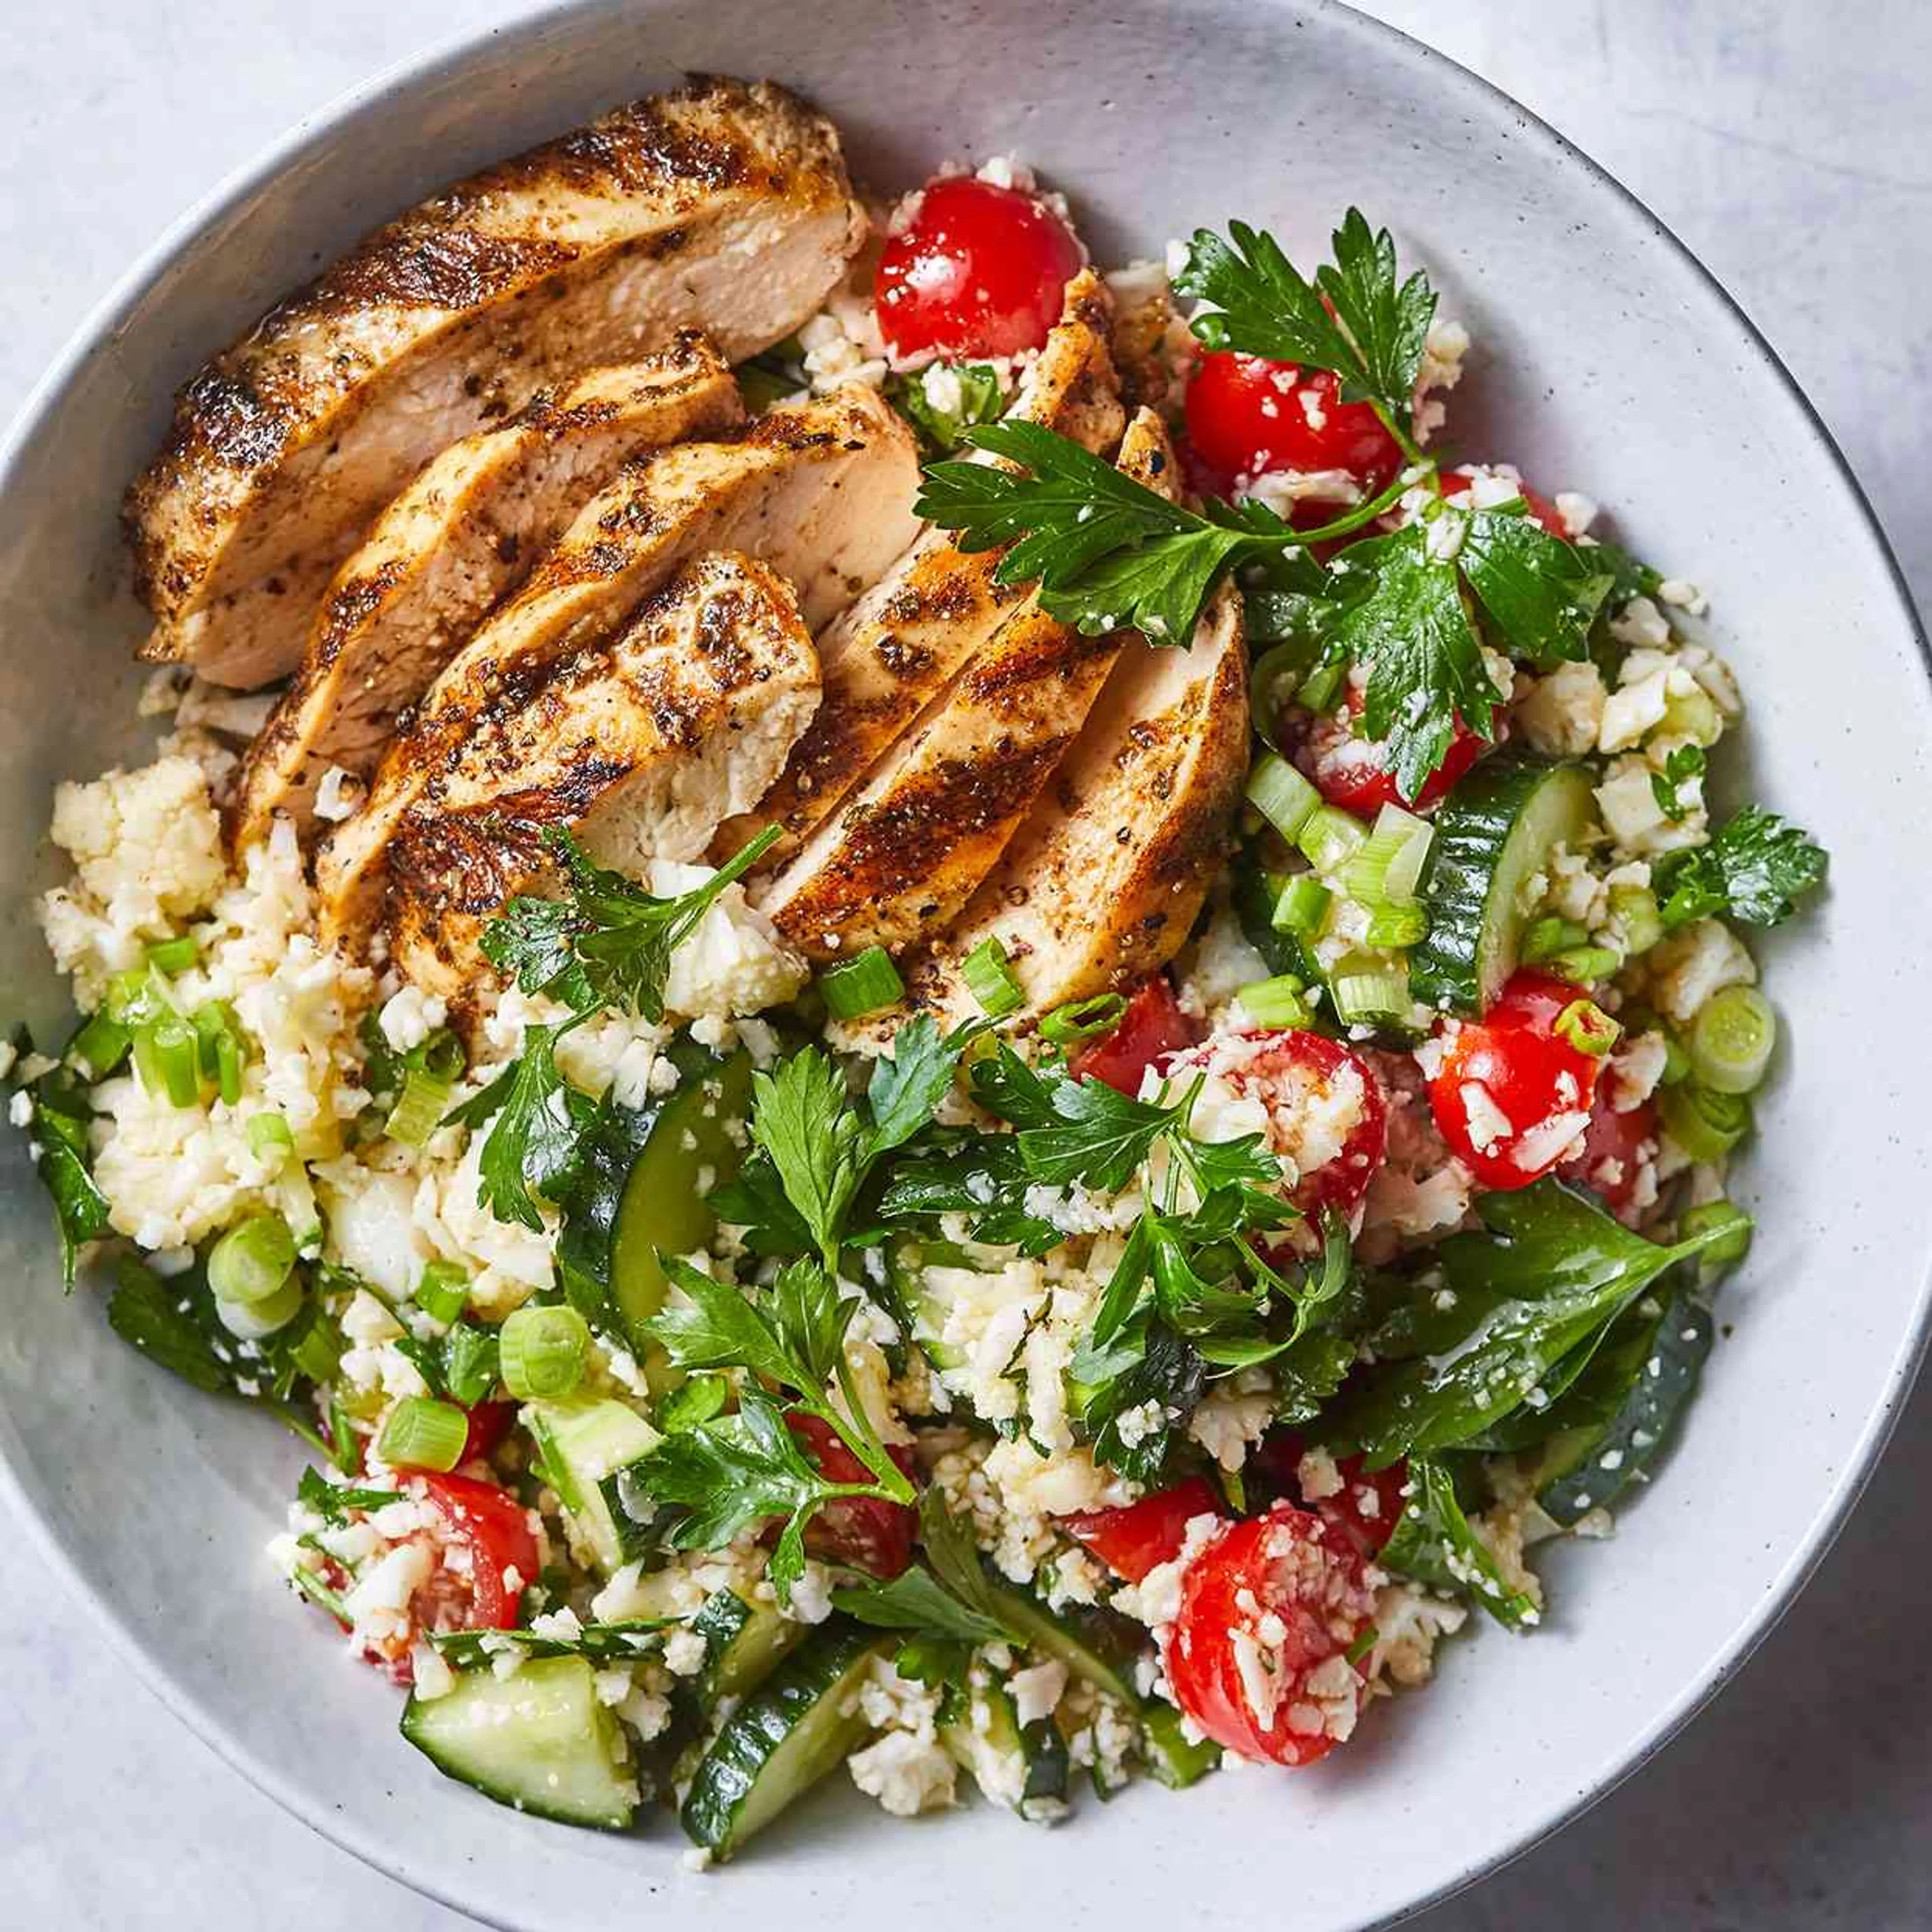 Spiced Grilled Chicken with Cauliflower "Rice" Tabbouleh